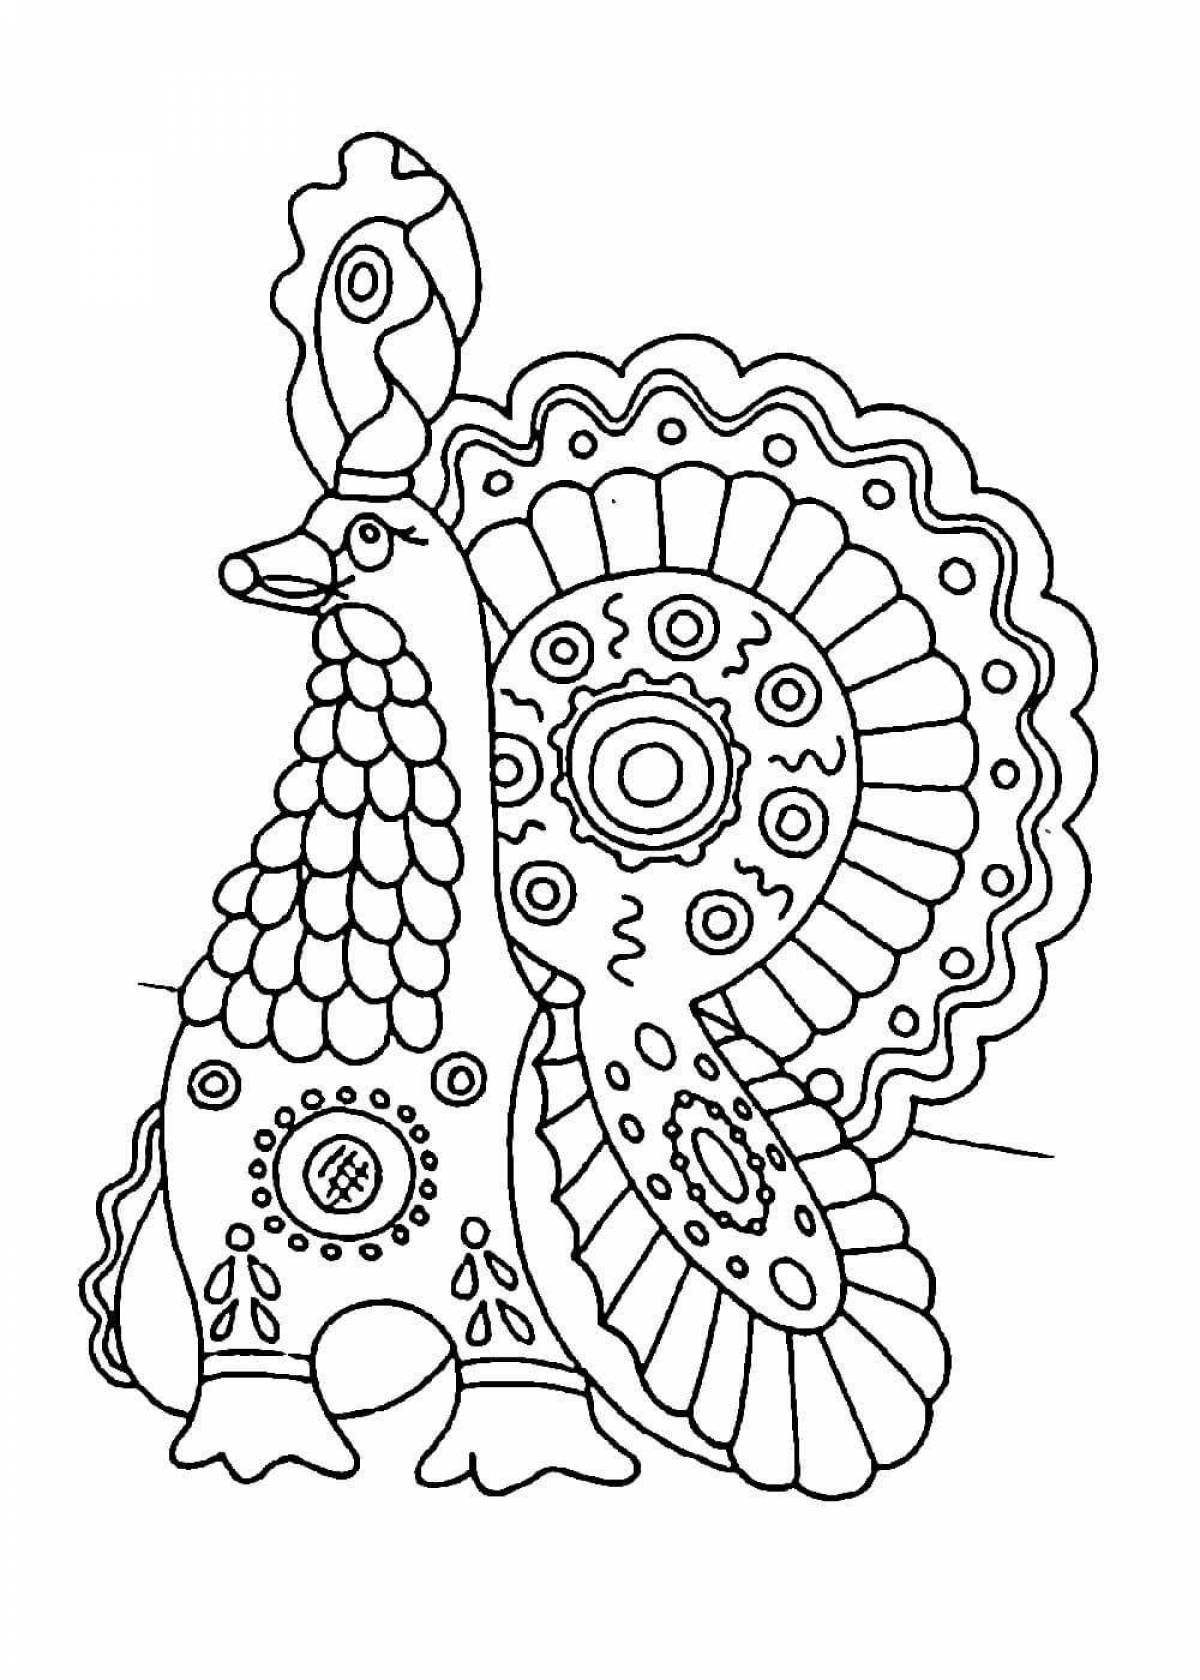 Coloring page charming dymkovo birds